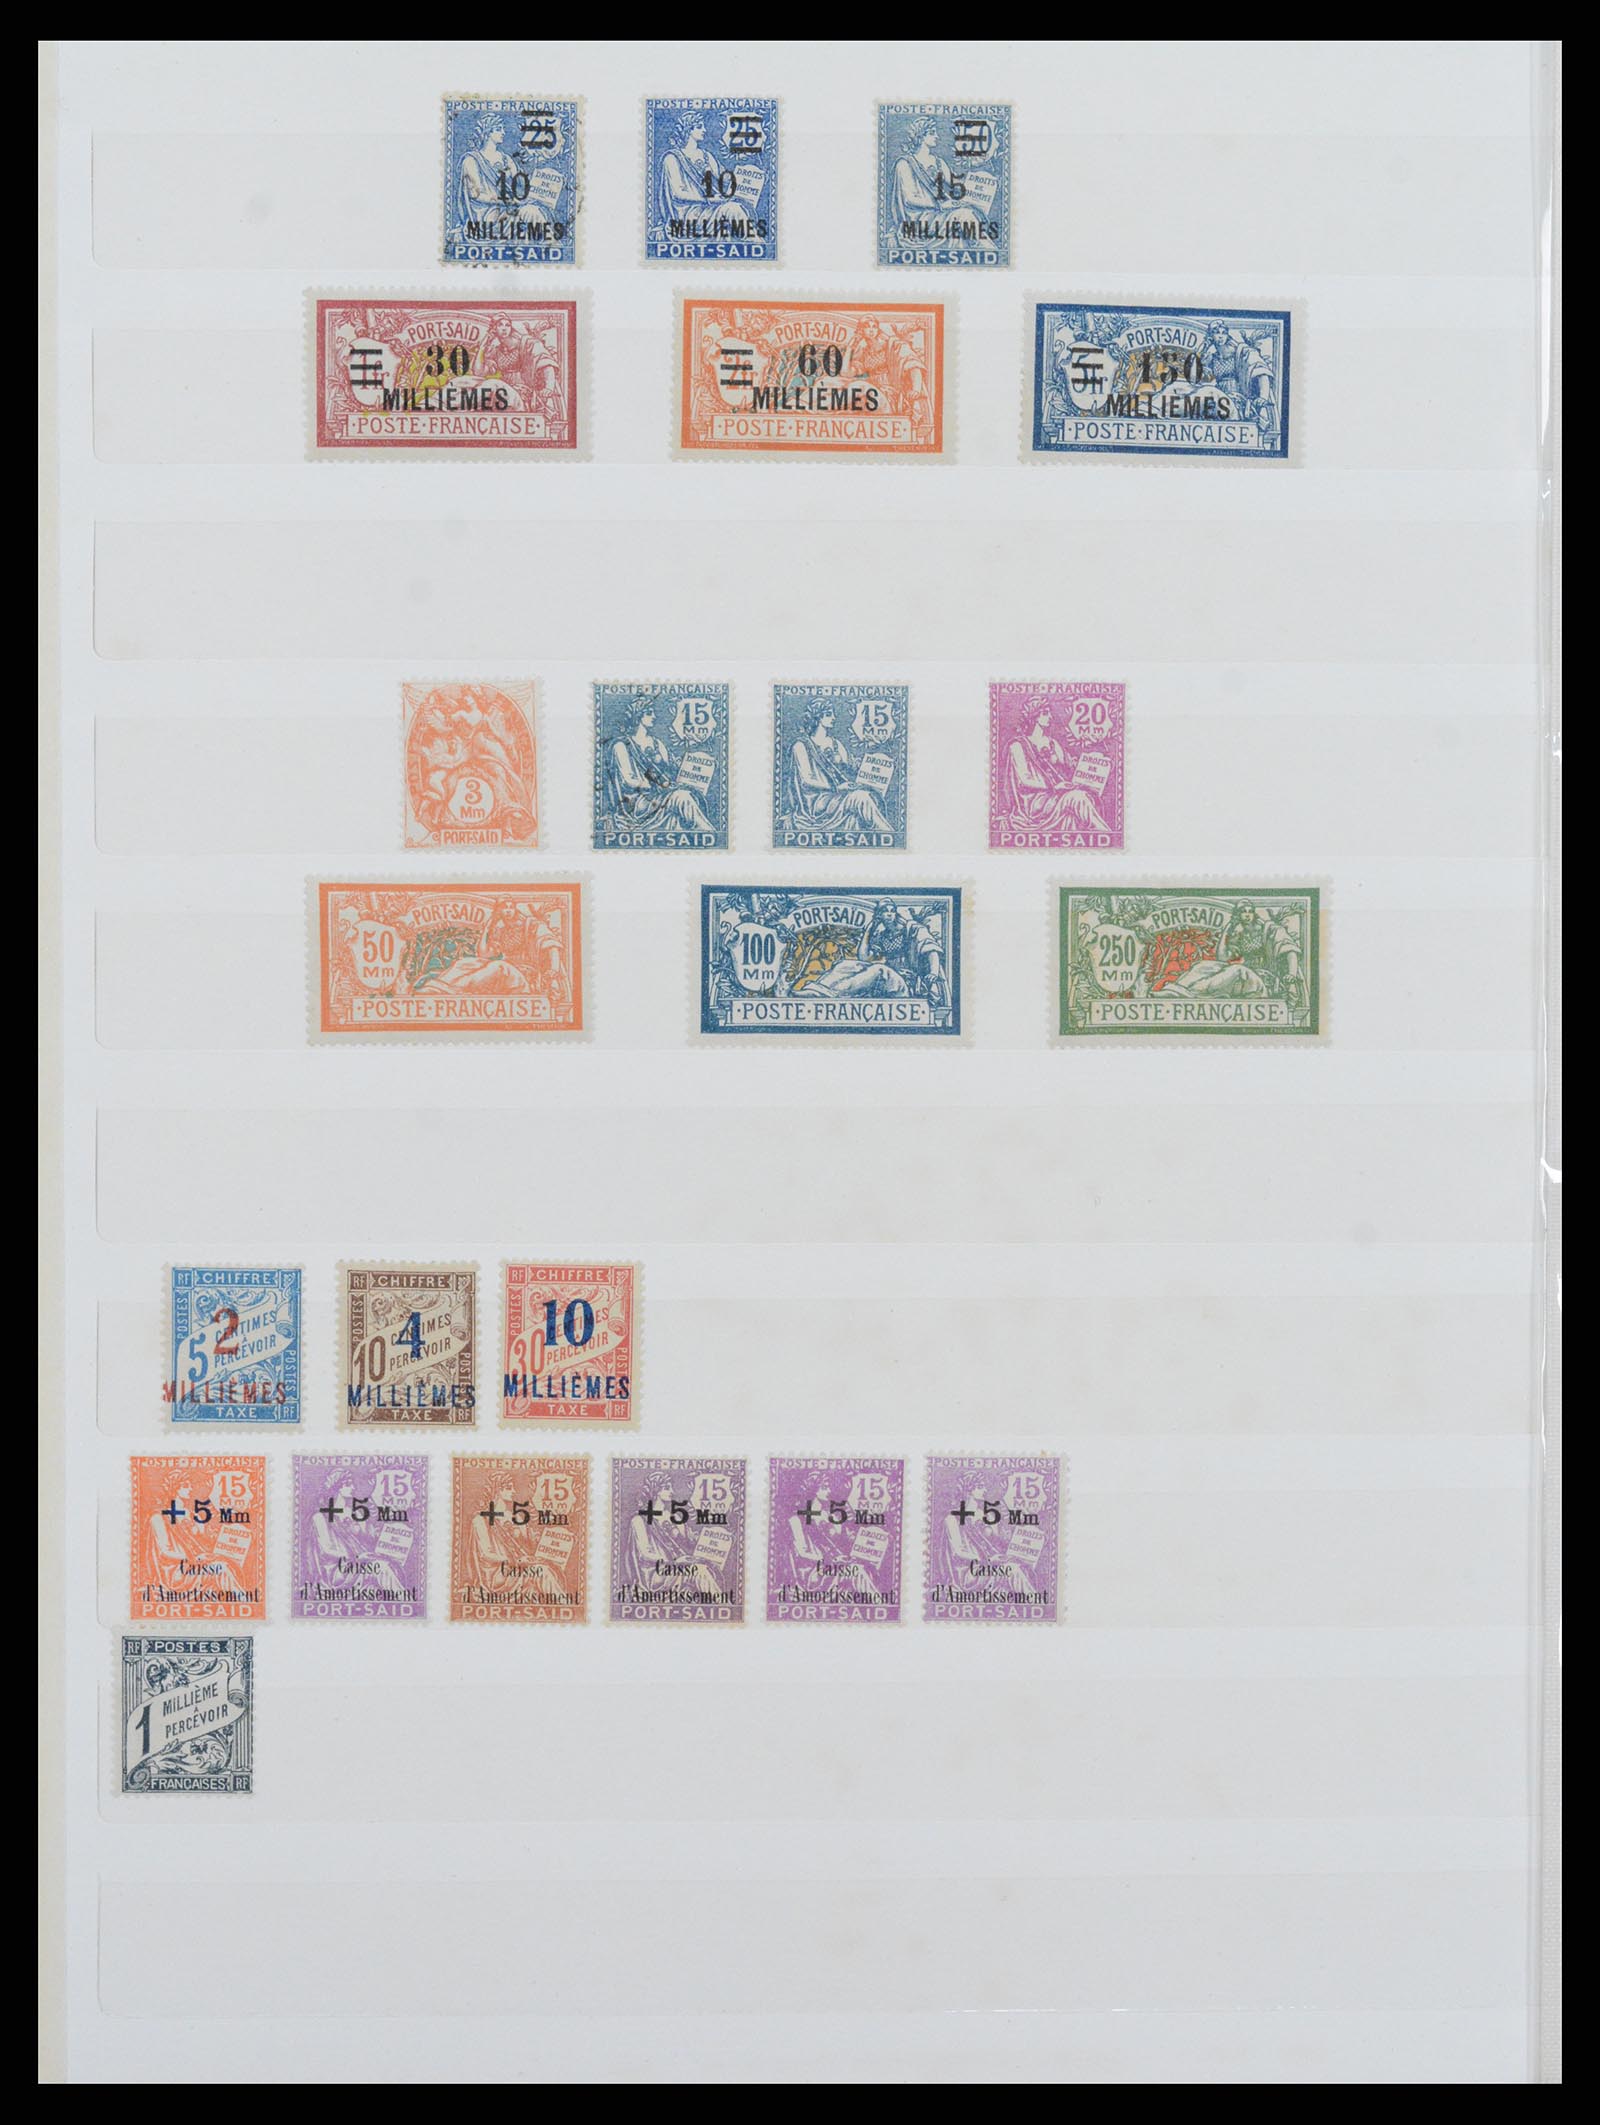 37523 007 - Stamp collection 37523 Offices abroad of France 1899-1930.